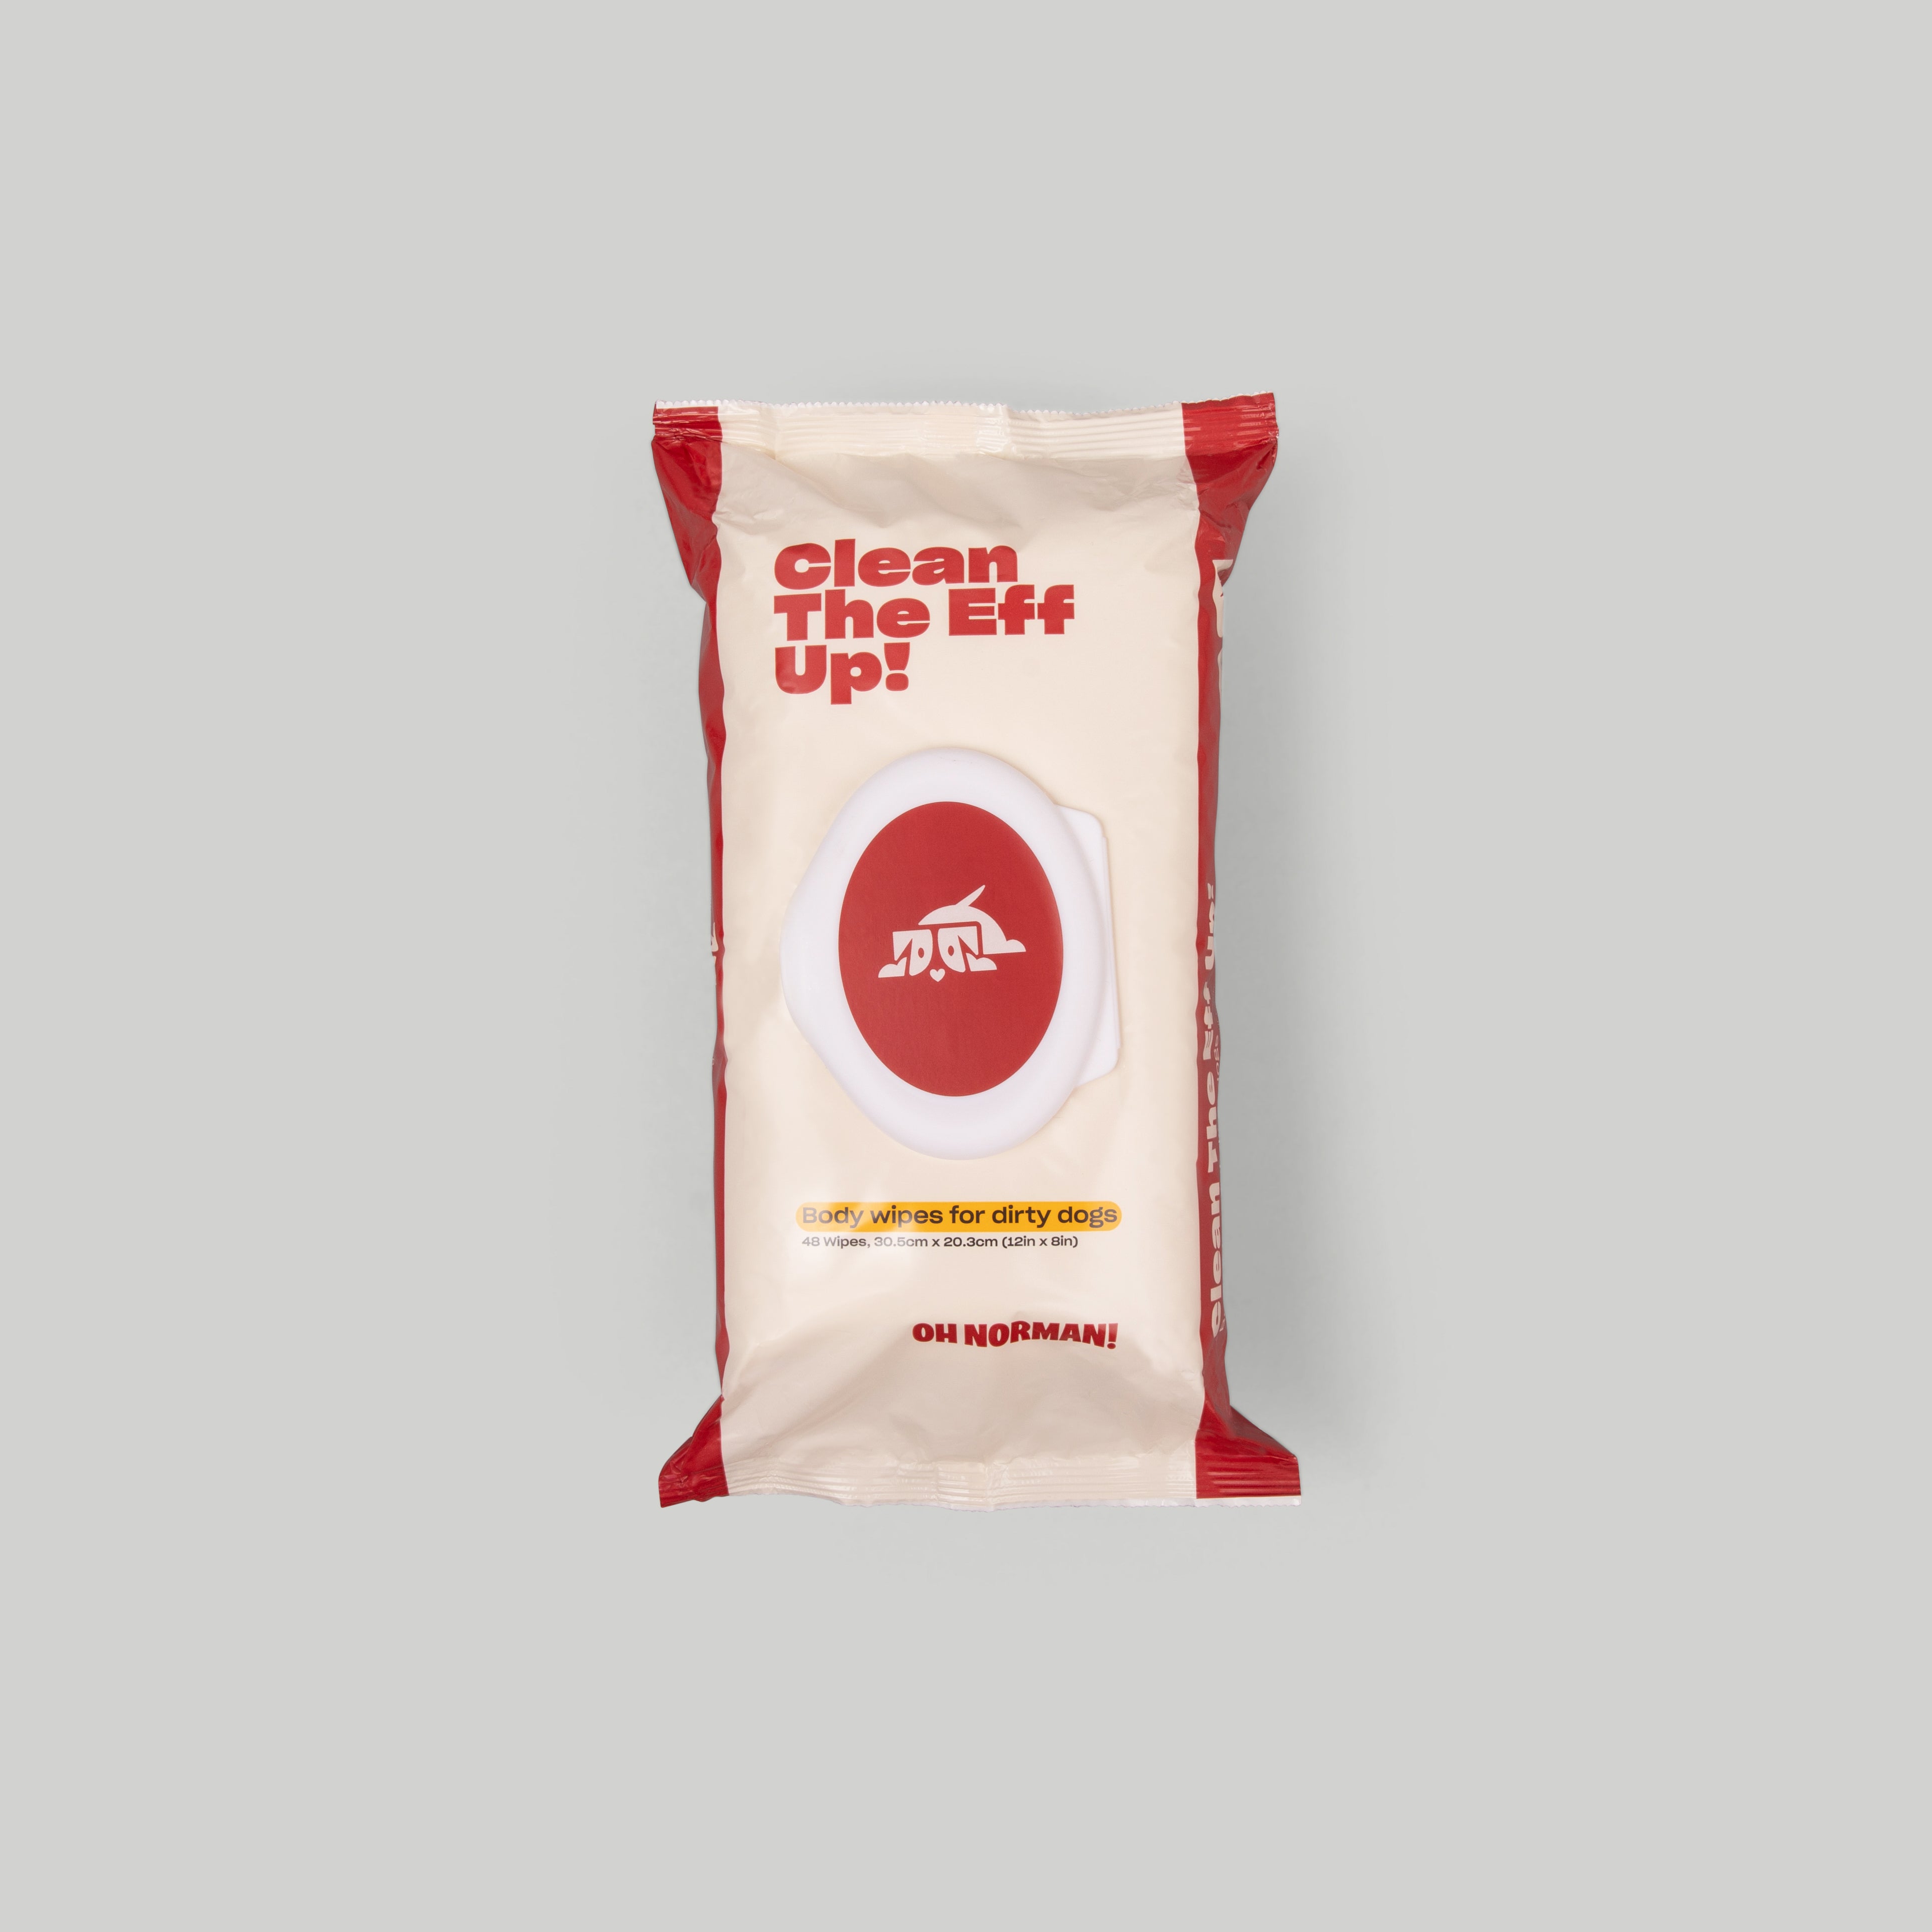 Clean The Eff Up! Body Wipes For Dirty Dogs